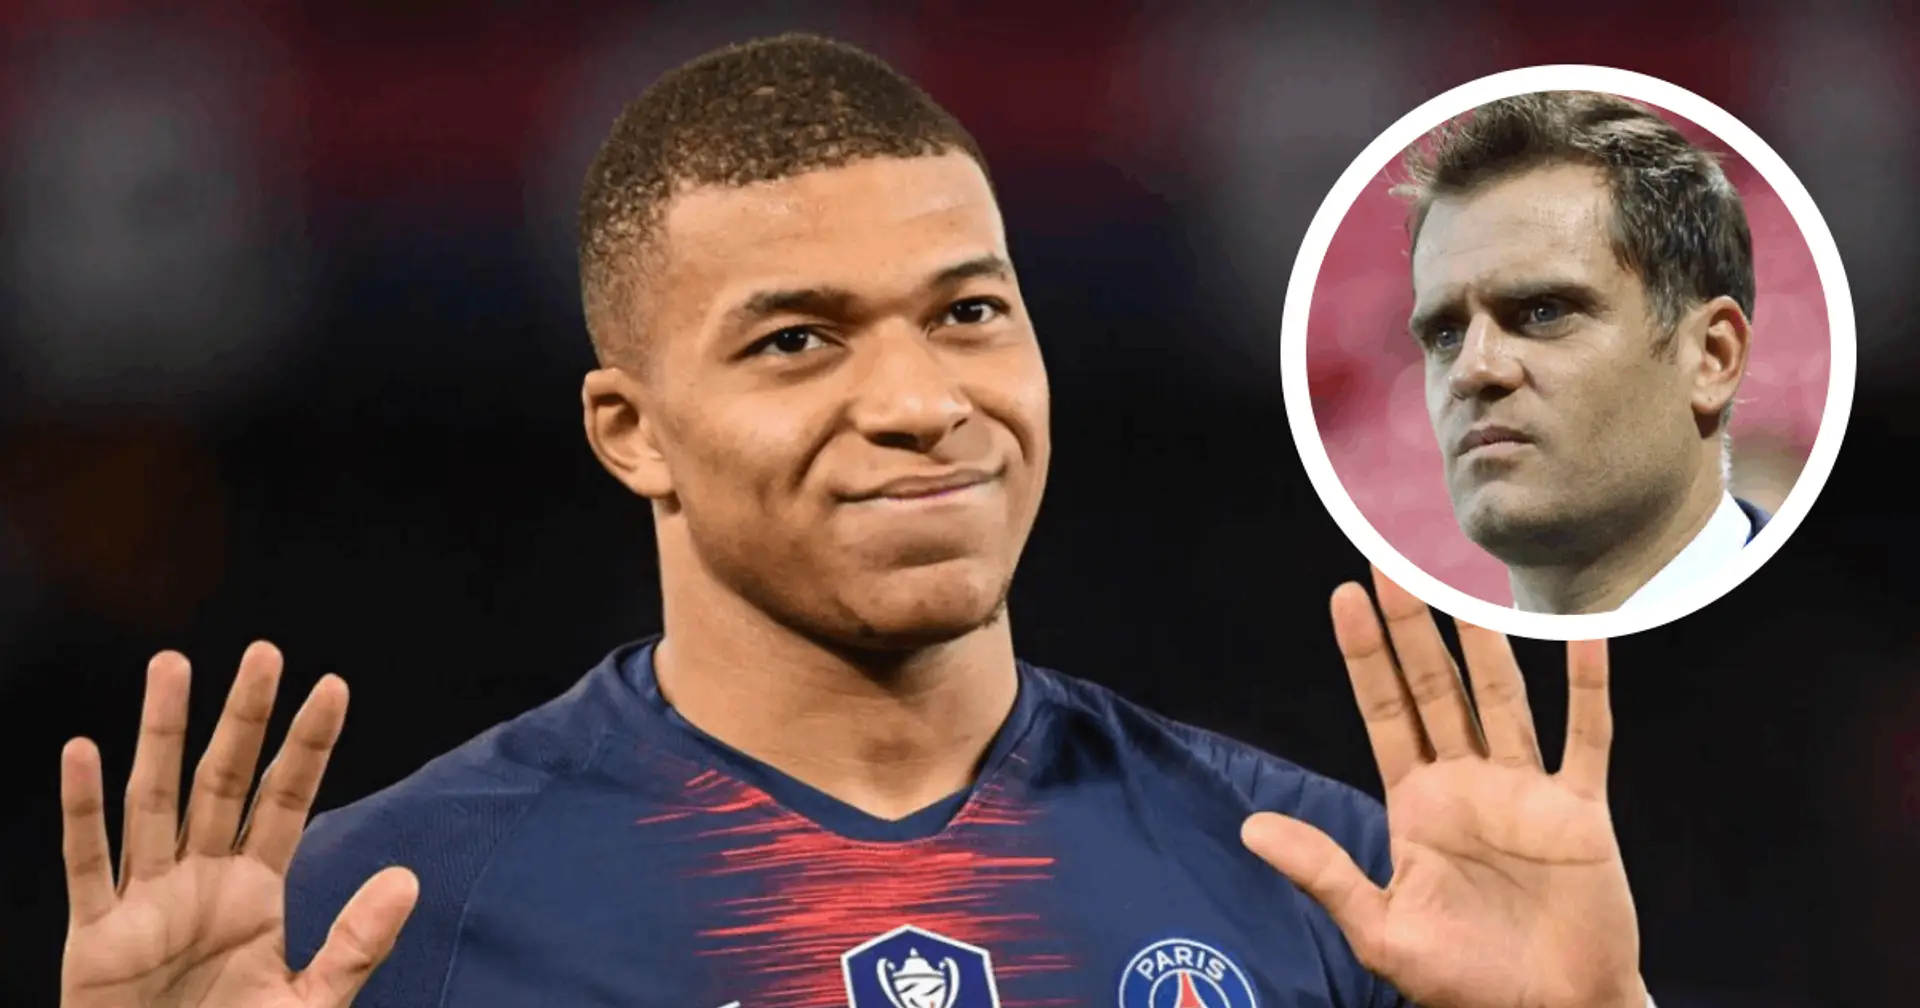 'Is he convinced to stay at PSG? I don't think so': Ex-PSG winger Jerome Rothen believes Kylian Mbappe is hiding the truth about his future plans